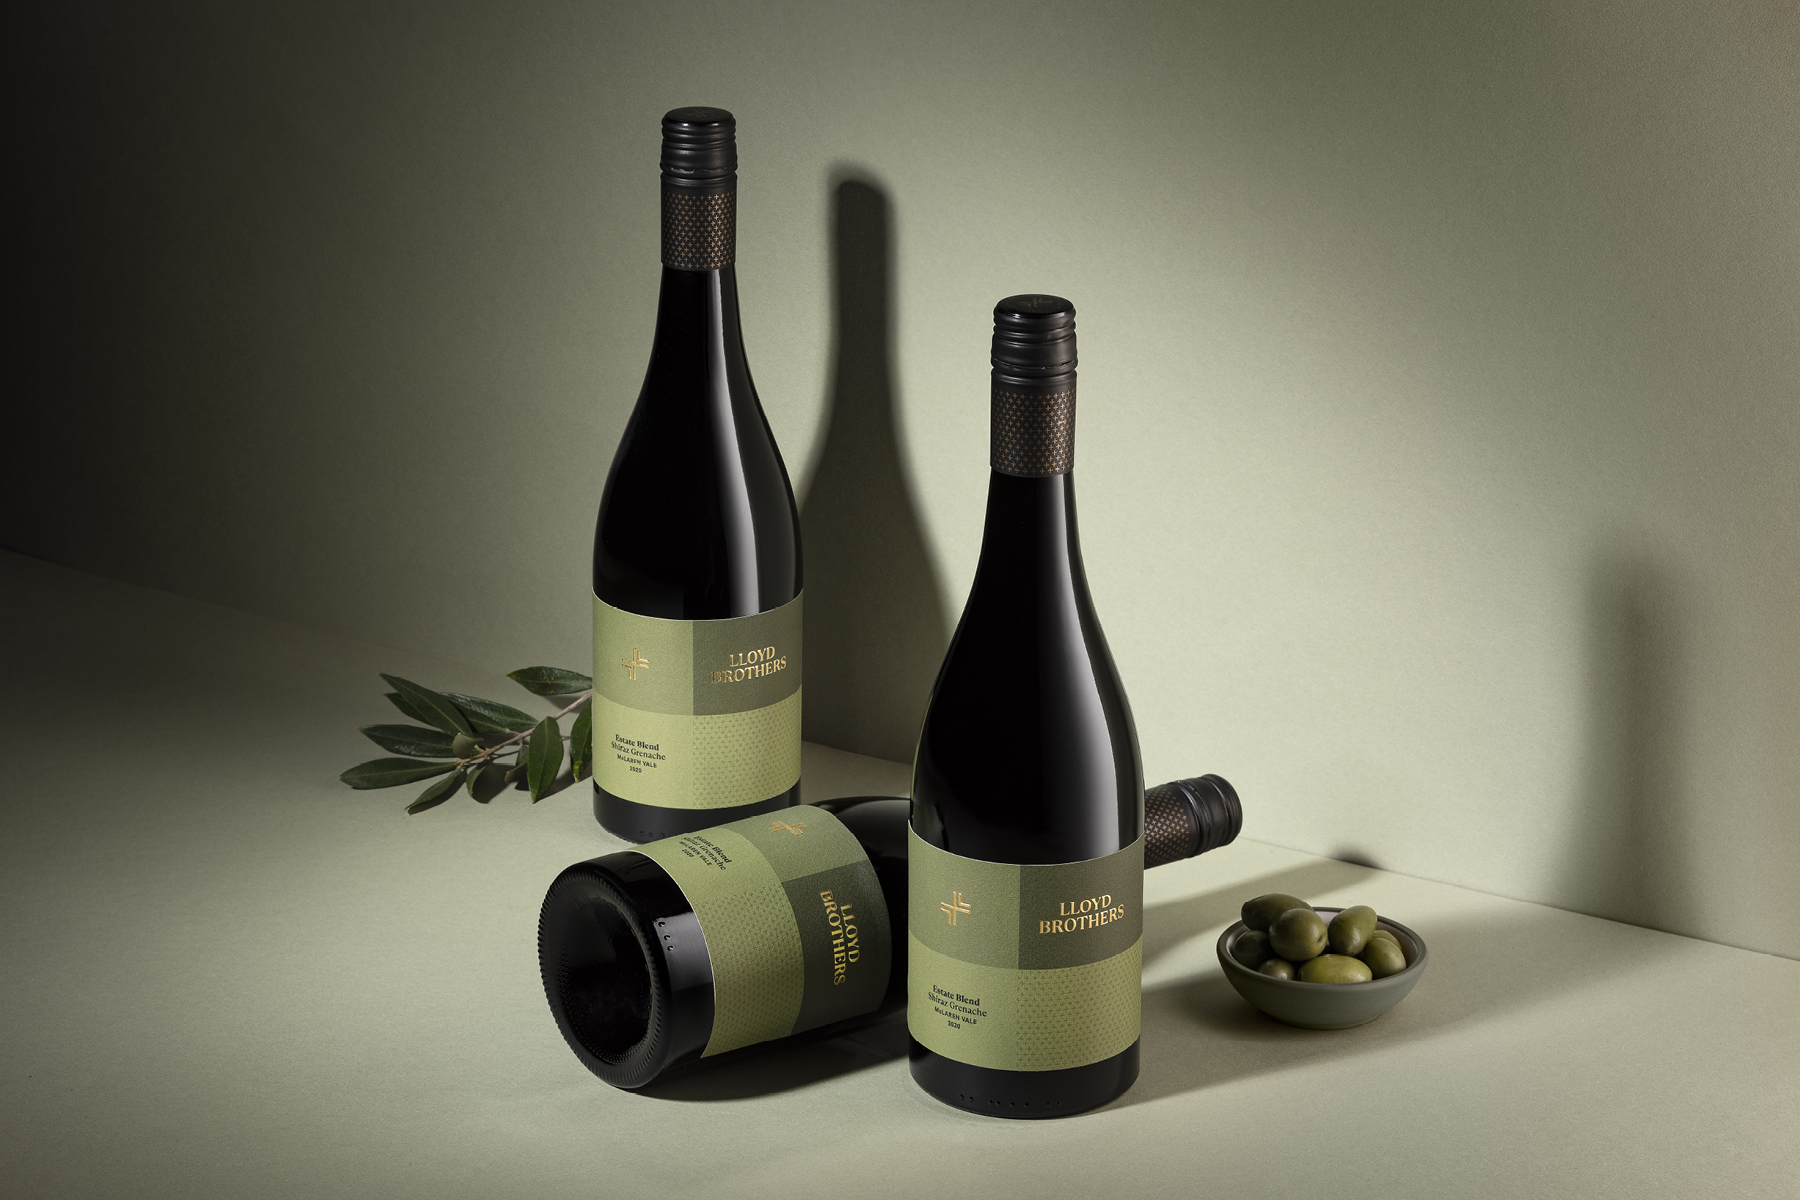 Cornershop Rebranding and Repositioning of the Family Owned Lloyd Brothers Winery